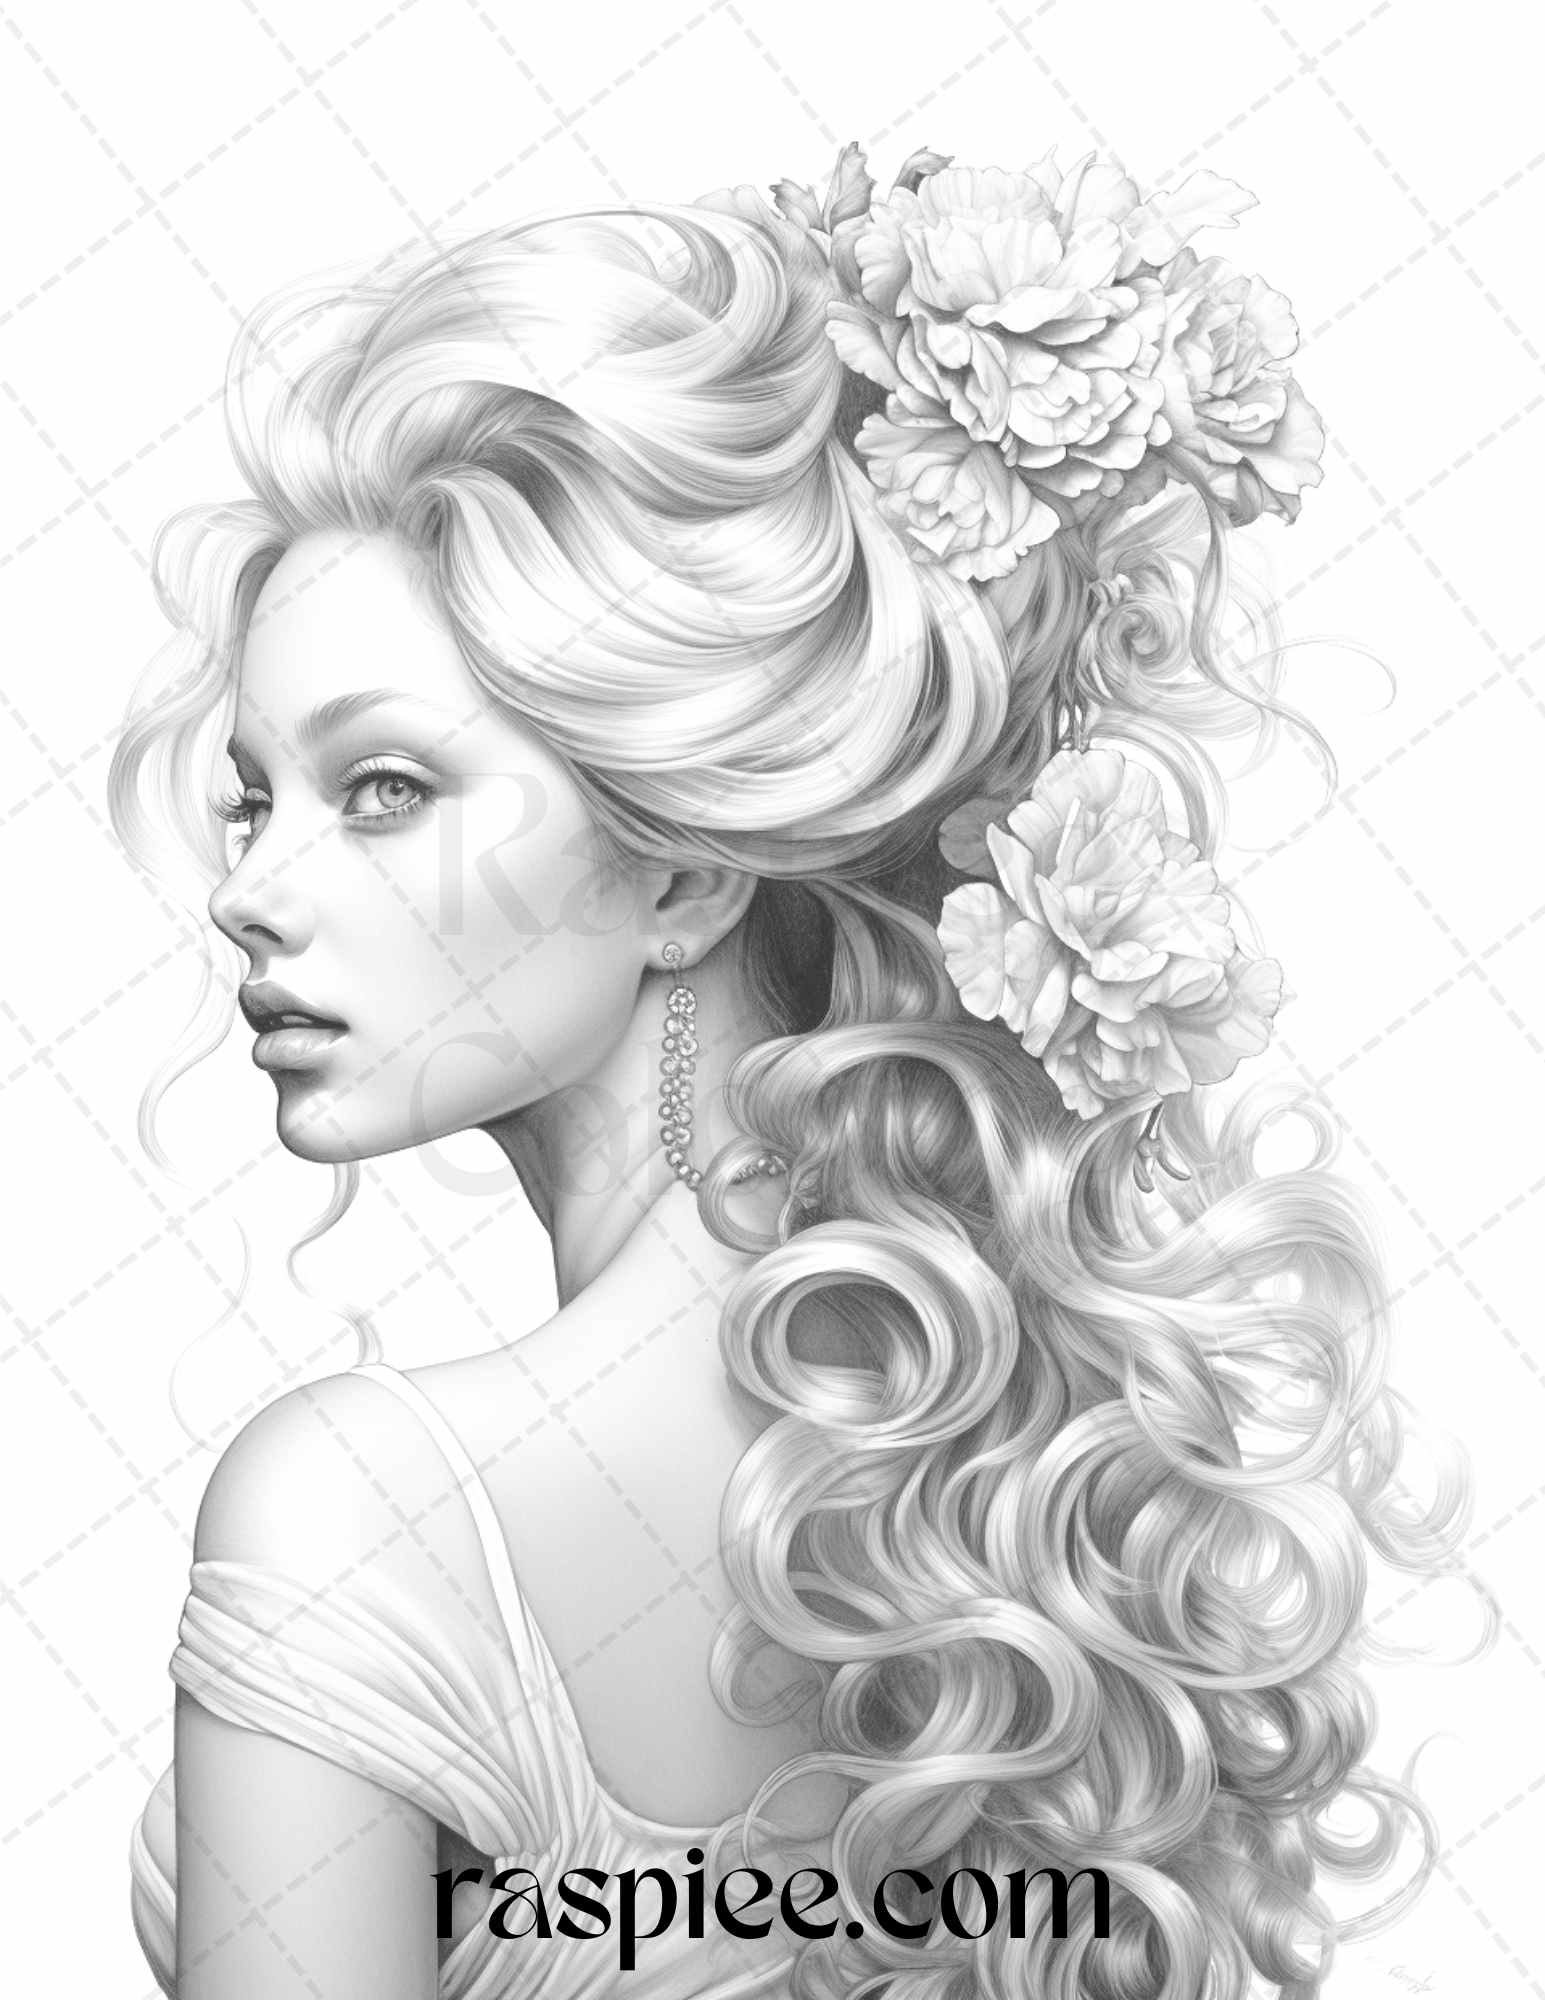 43 Beautiful Hairstyles Grayscale Coloring Pages Printable for Adults, PDF File Instant Download - Raspiee Coloring